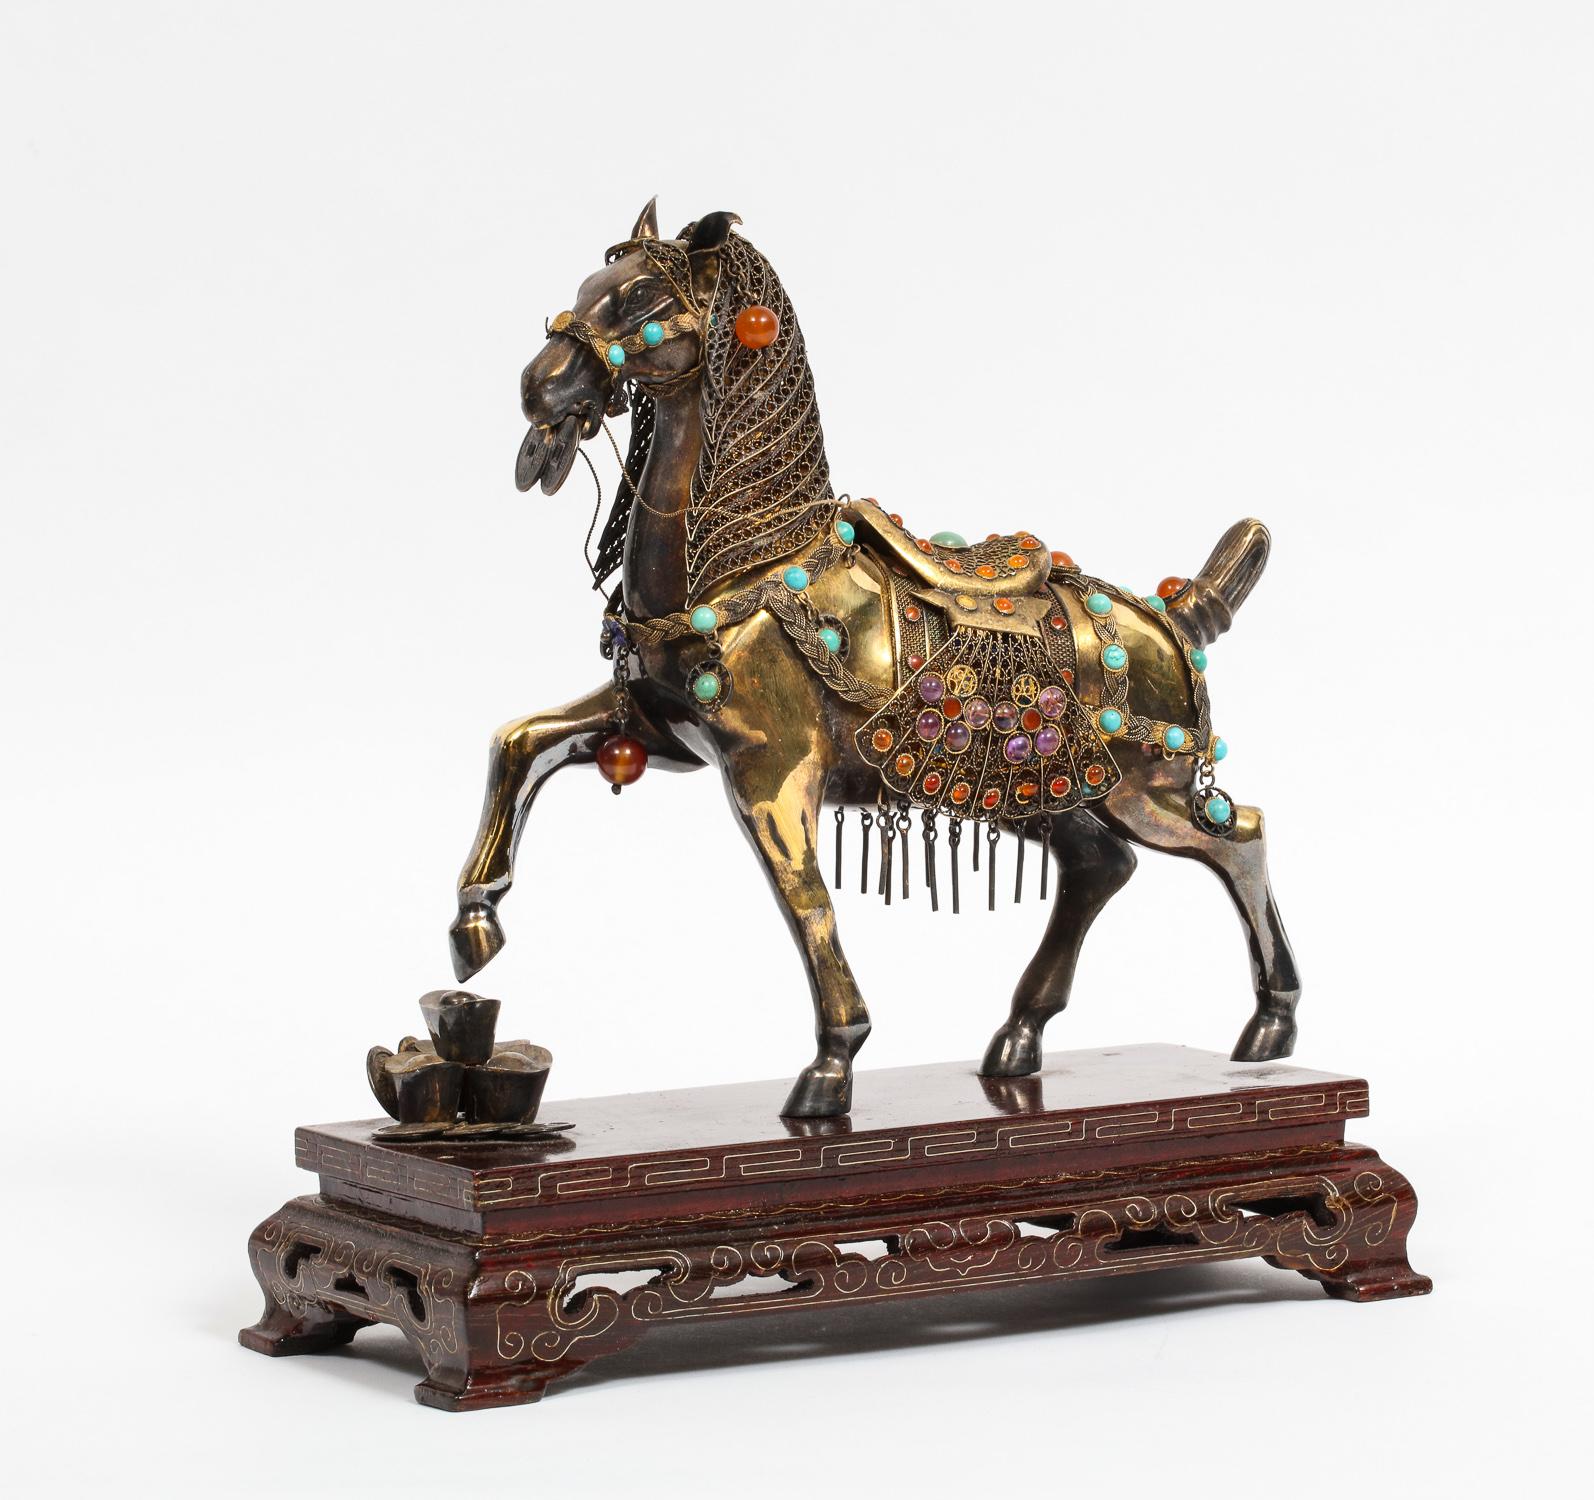 Chinese sterling silver horse with applied jewels and turquoise on wood stand,
20th century.

Marked Silver and 925.

Measures: 8.25